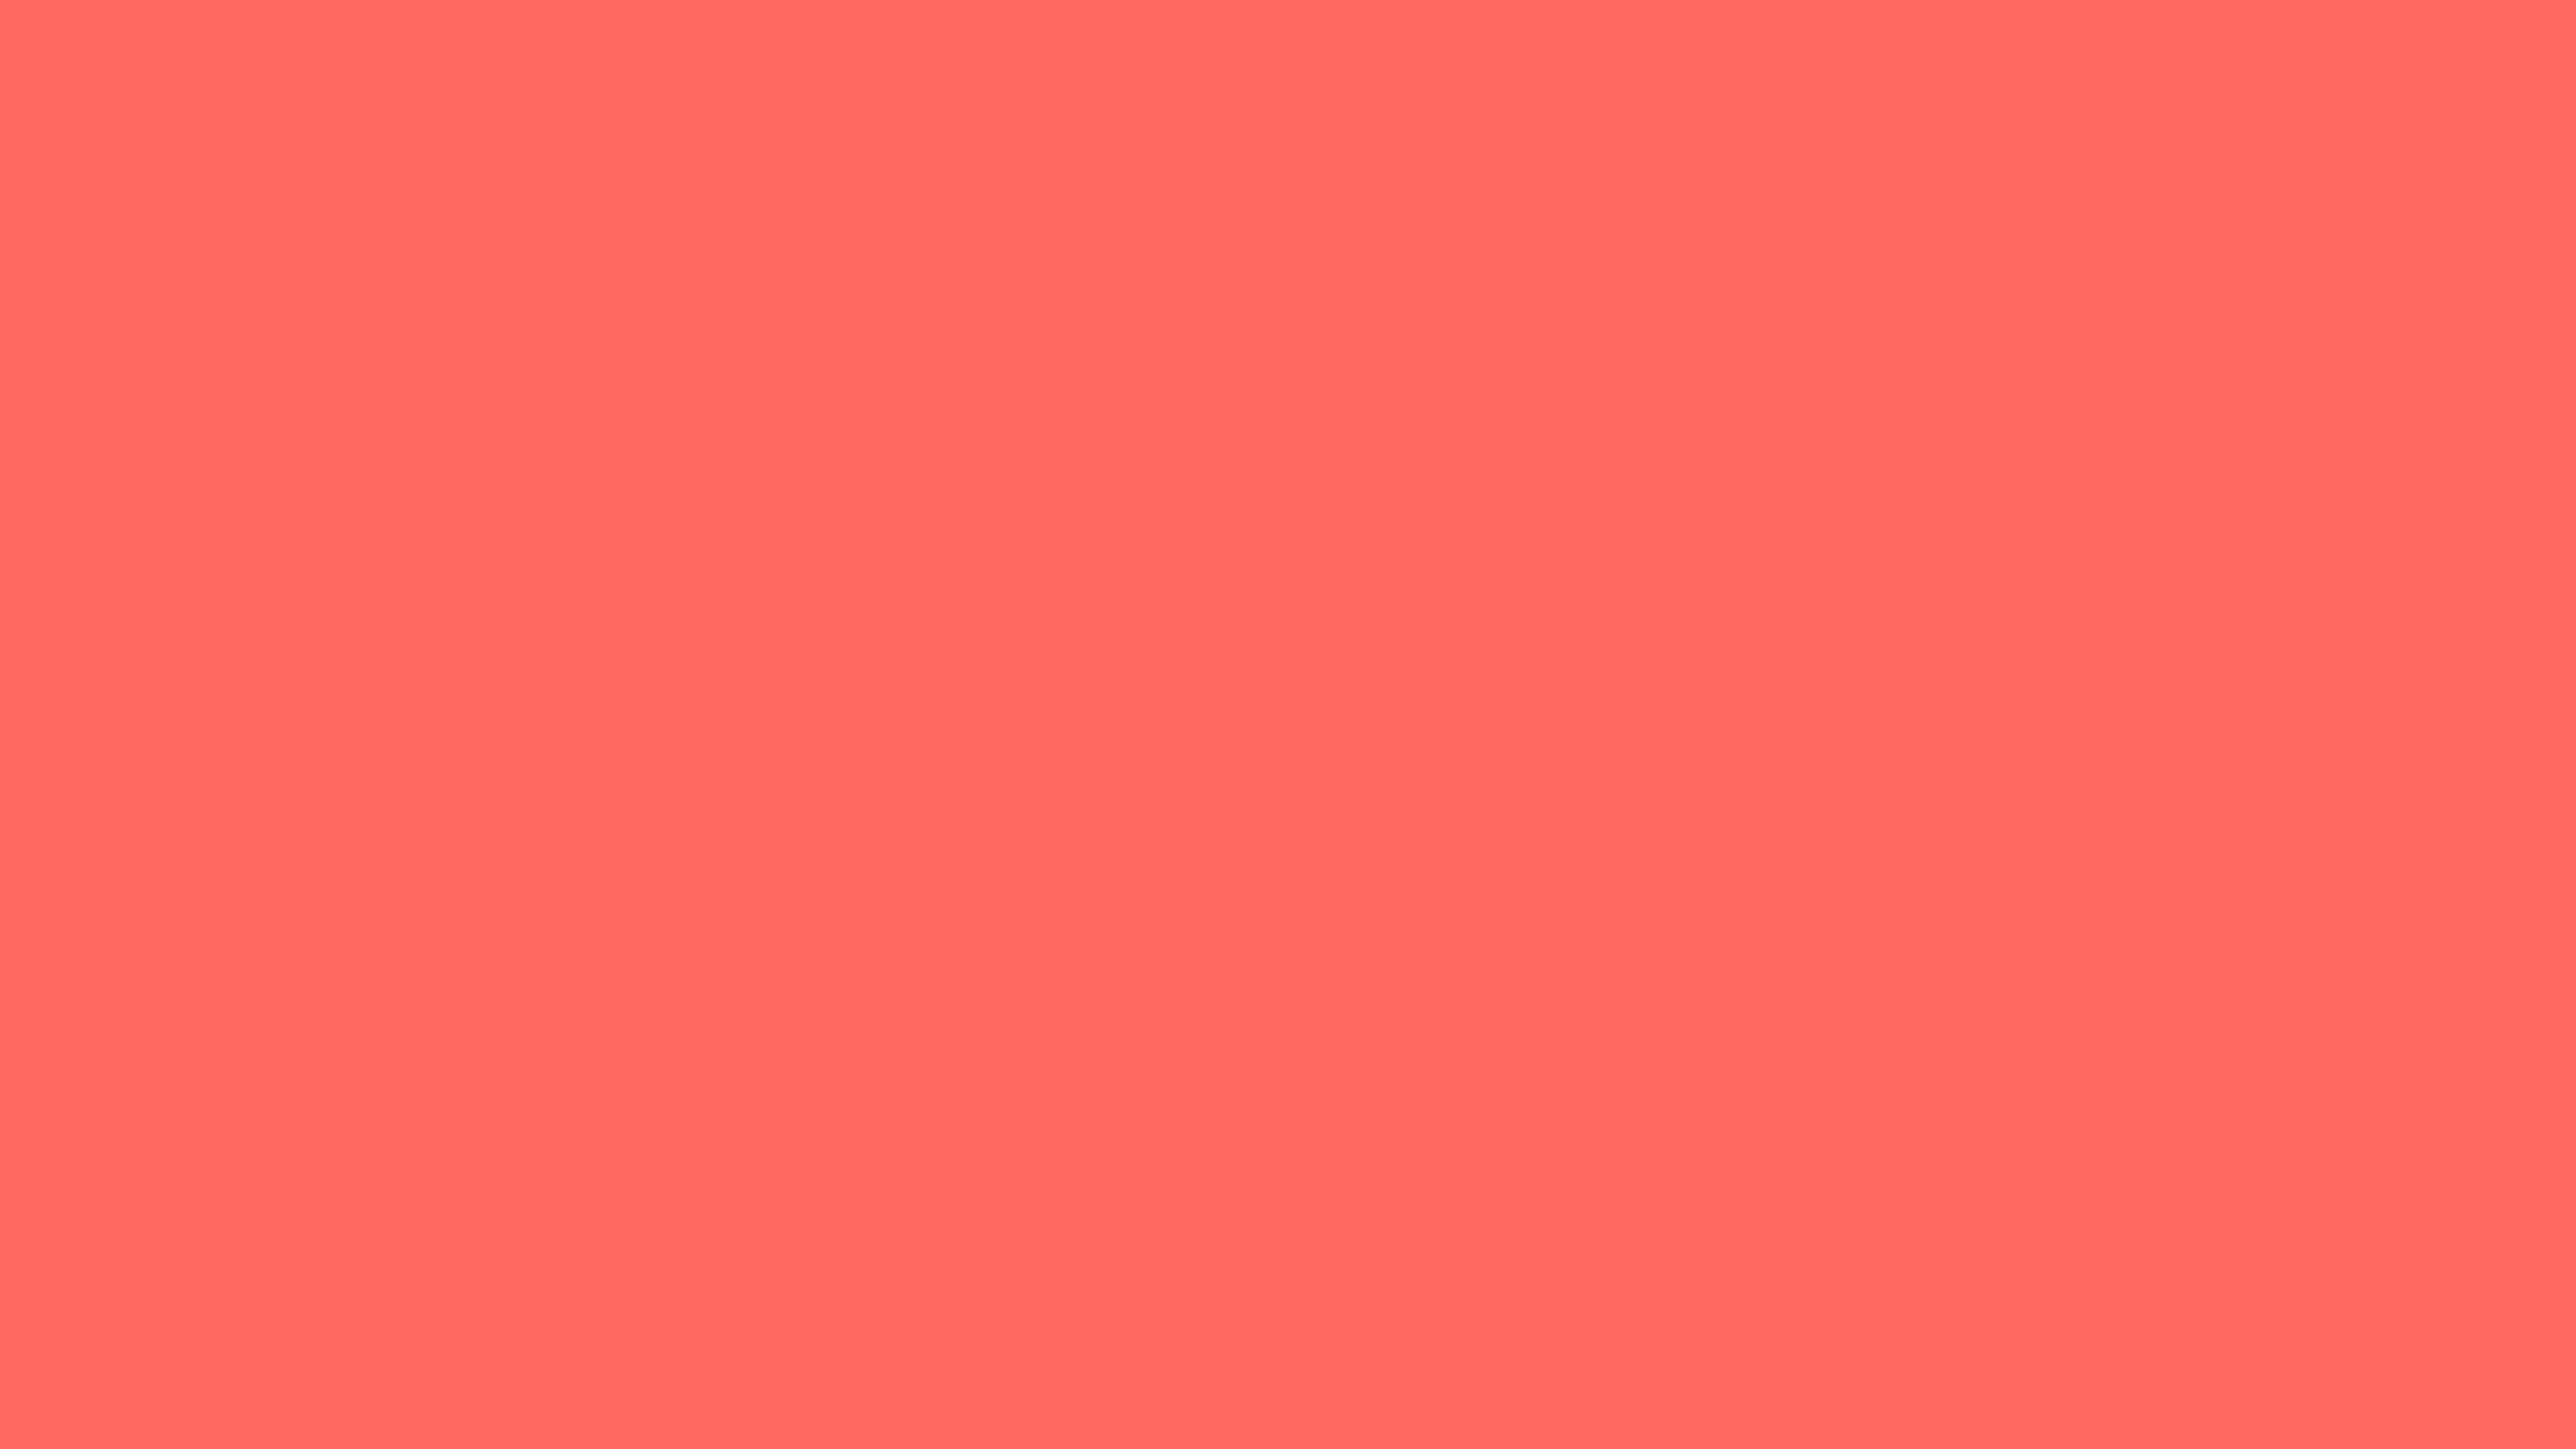 7680x4320 Pastel Red Solid Color Background